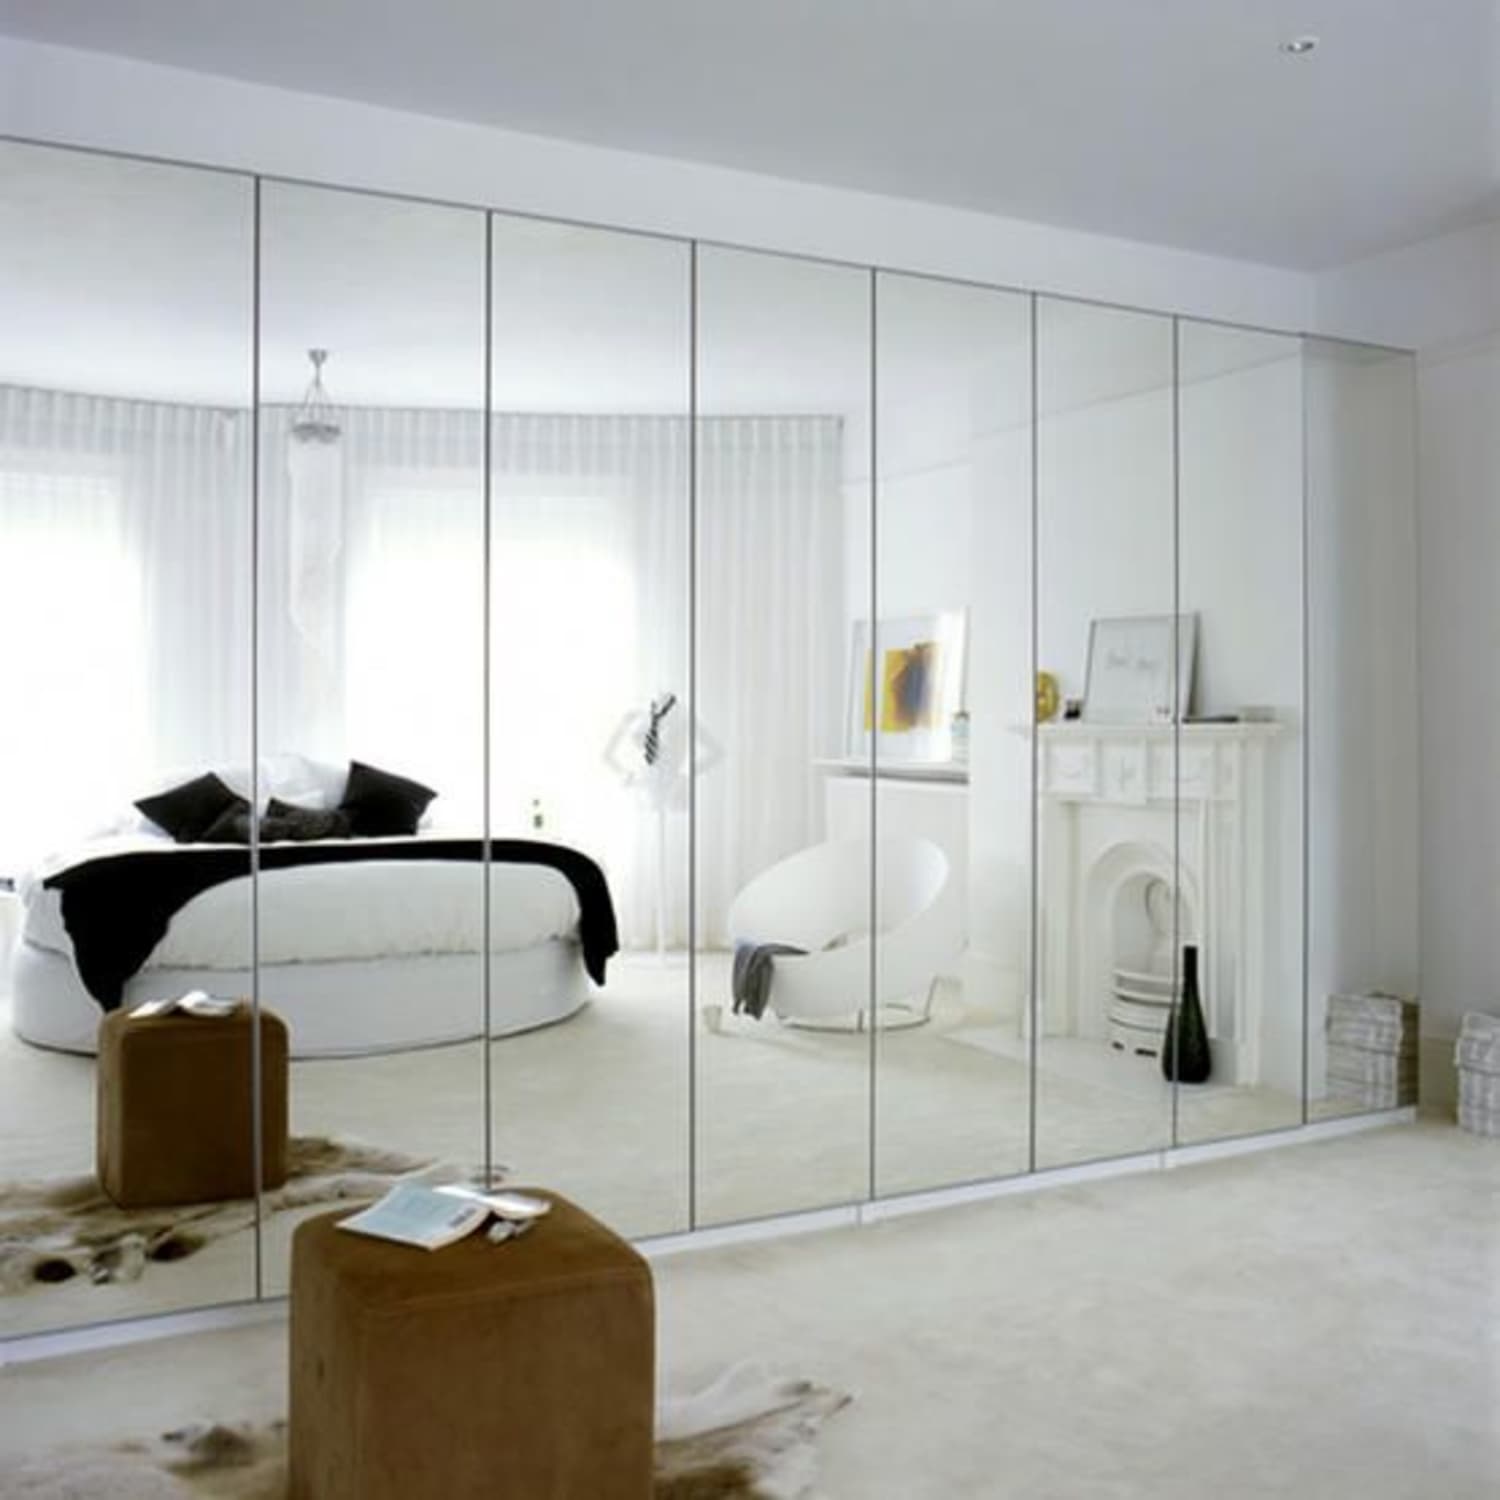 Plagued With Dated Mirrored Walls? 5 Design Ideas to Make Them